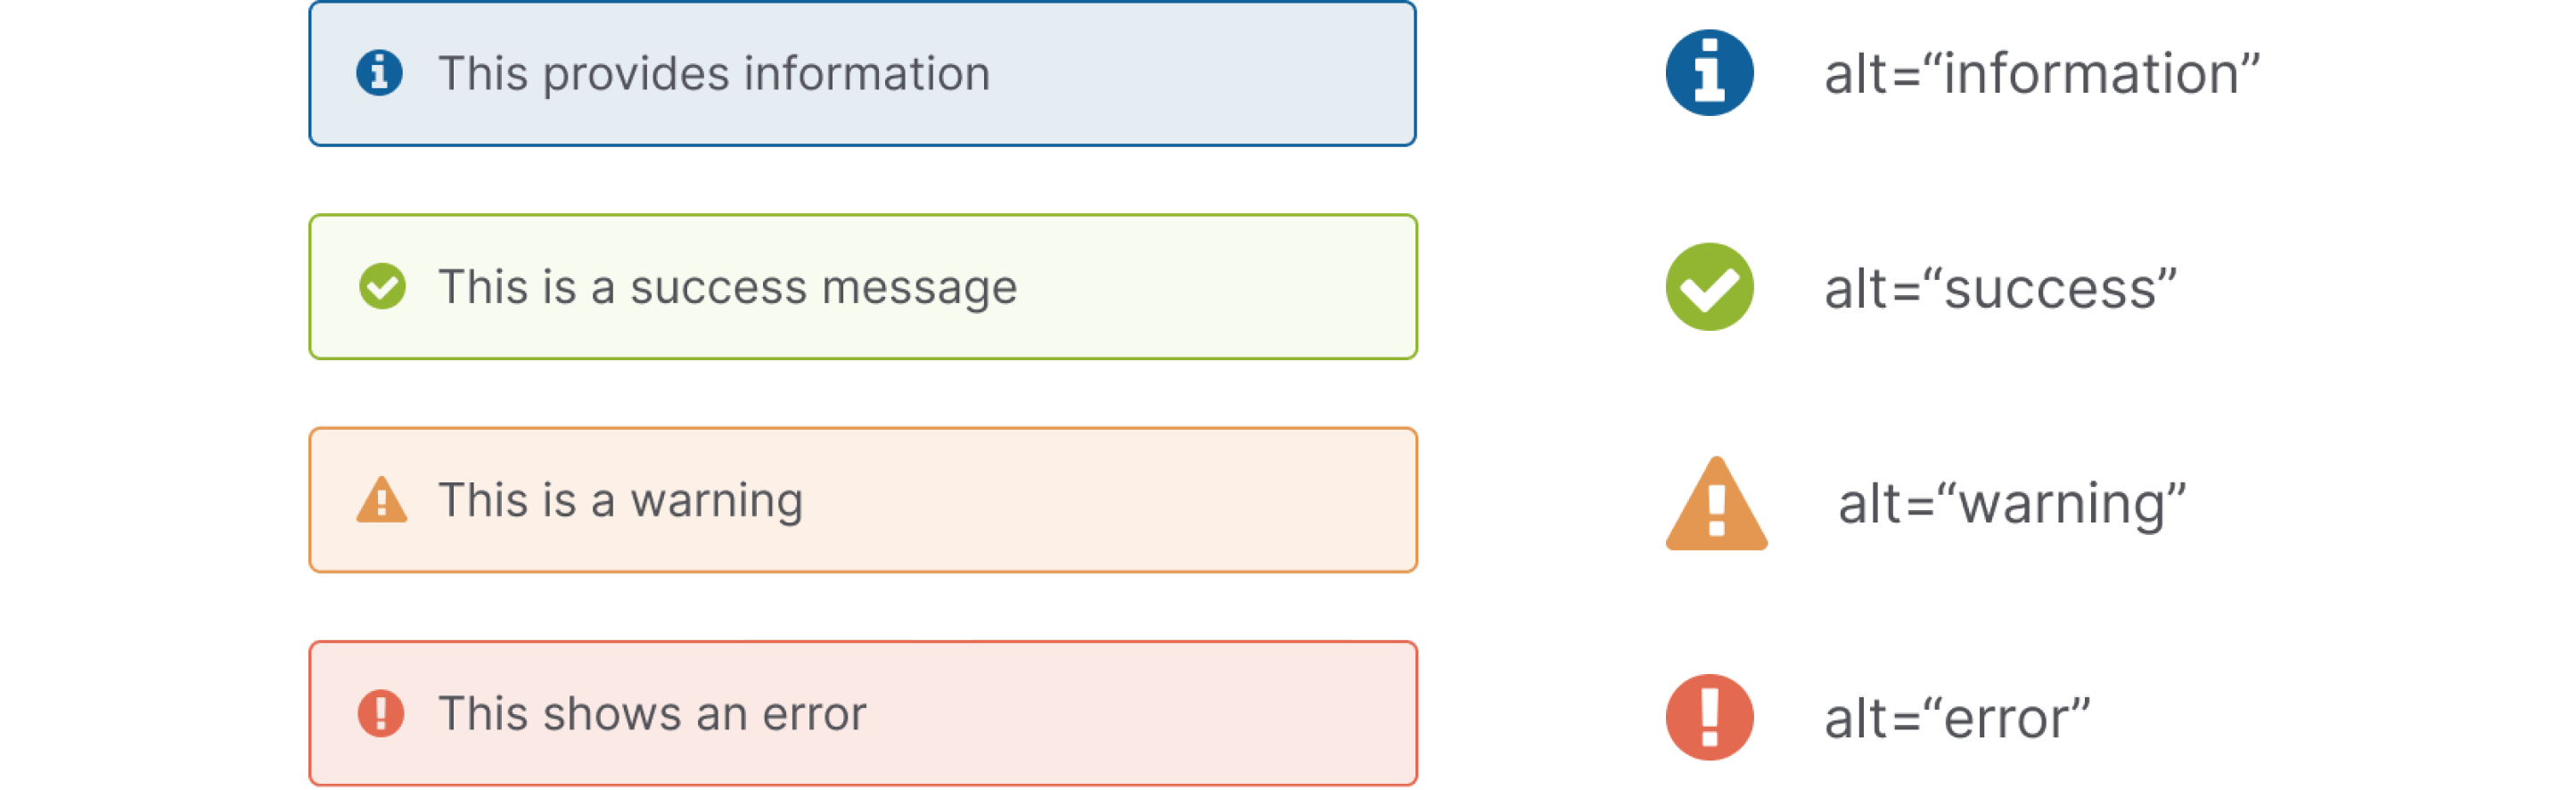 Four alert designs, the first is blue and is meant to provide information, the second is green and shows a success message, the third is orange and shows a warning message, and the fourth is red and meant to show an error.